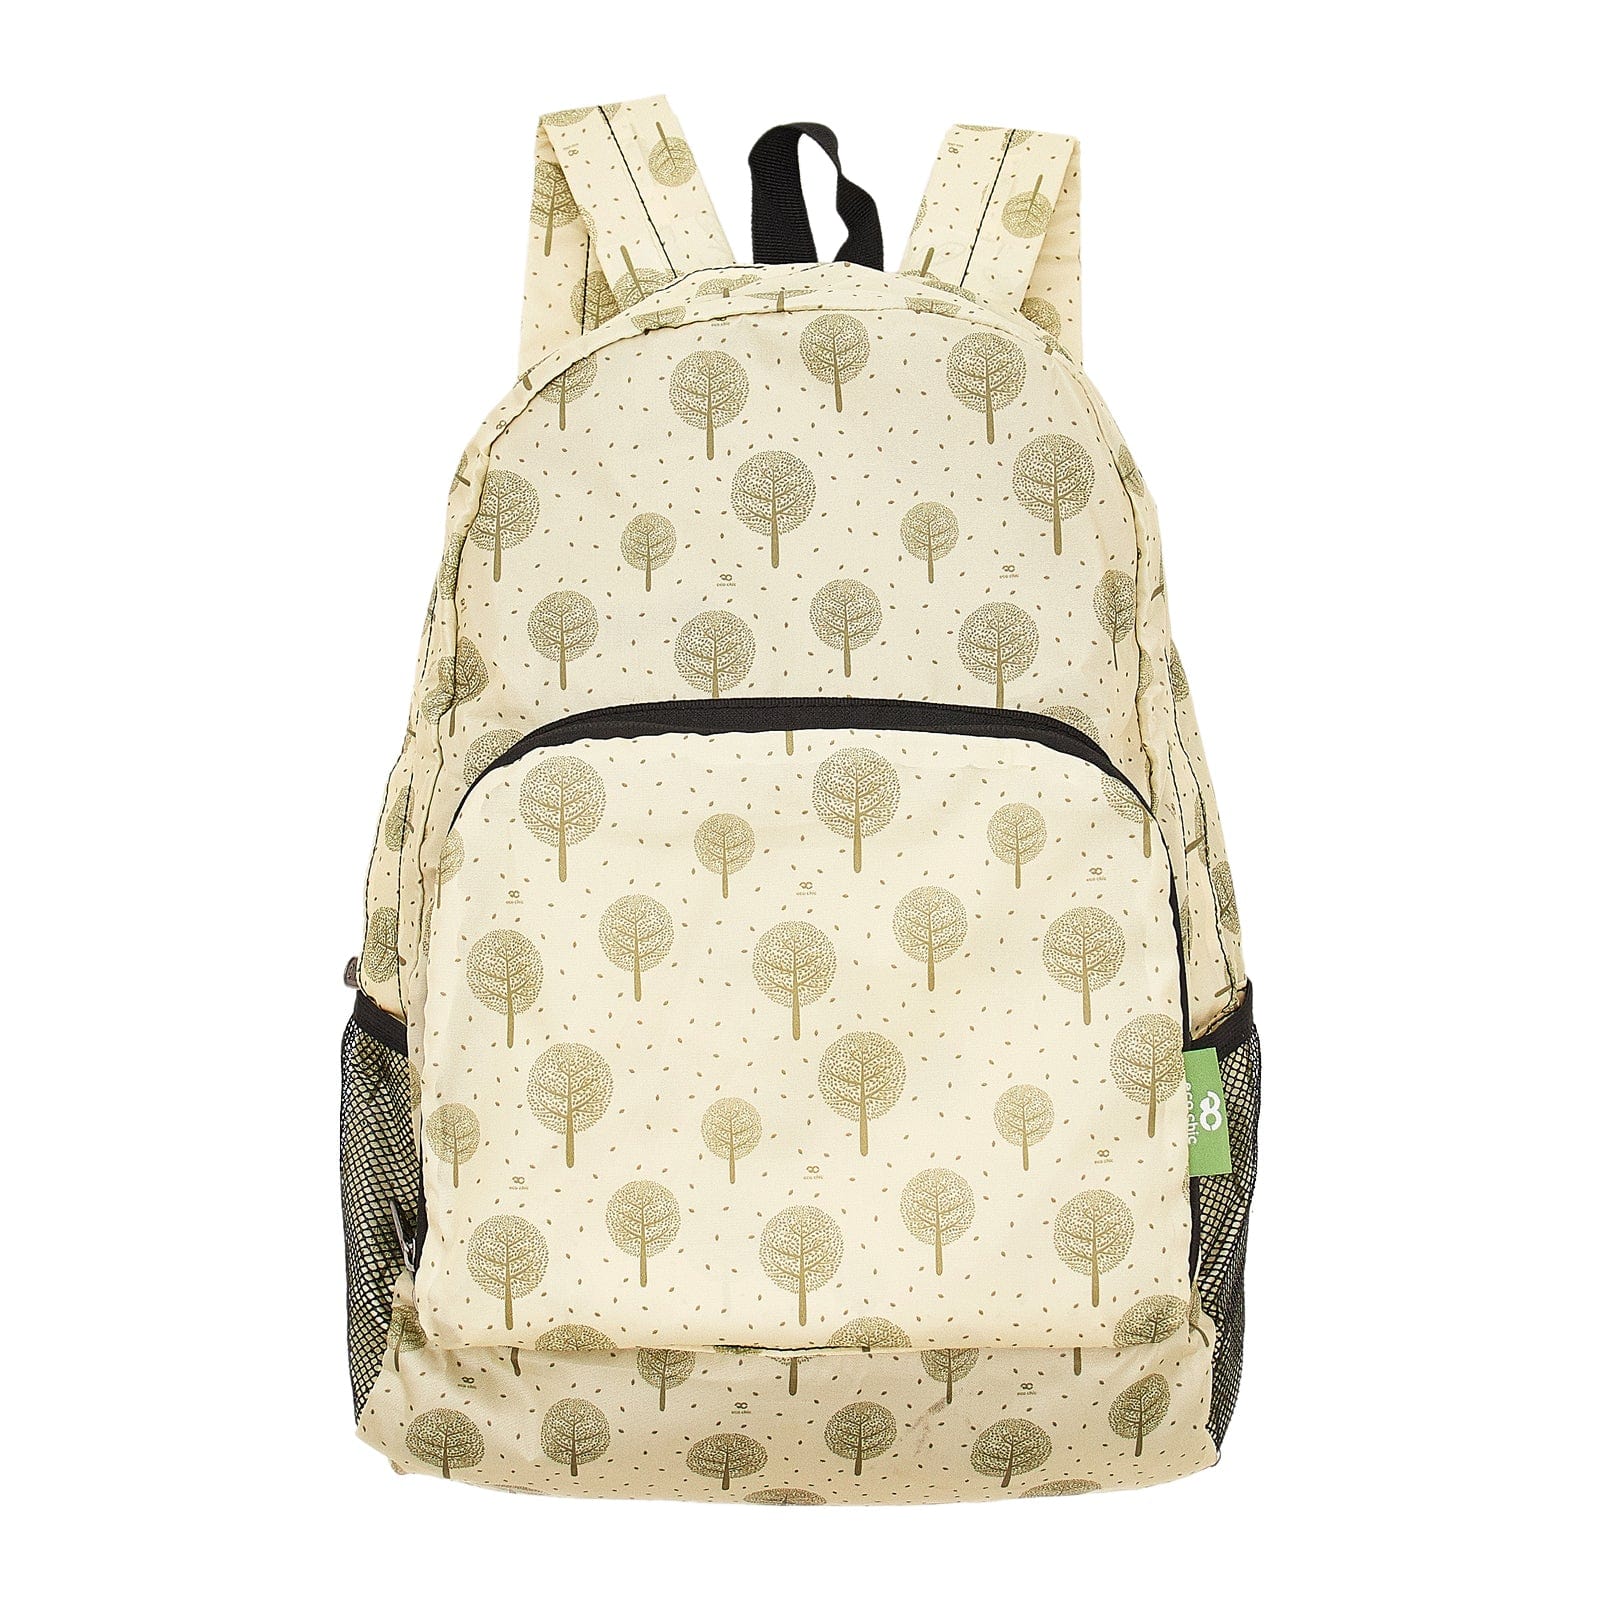 Eco Chic Beige Eco Chic Lightweight Foldable Backpack Tree of Life